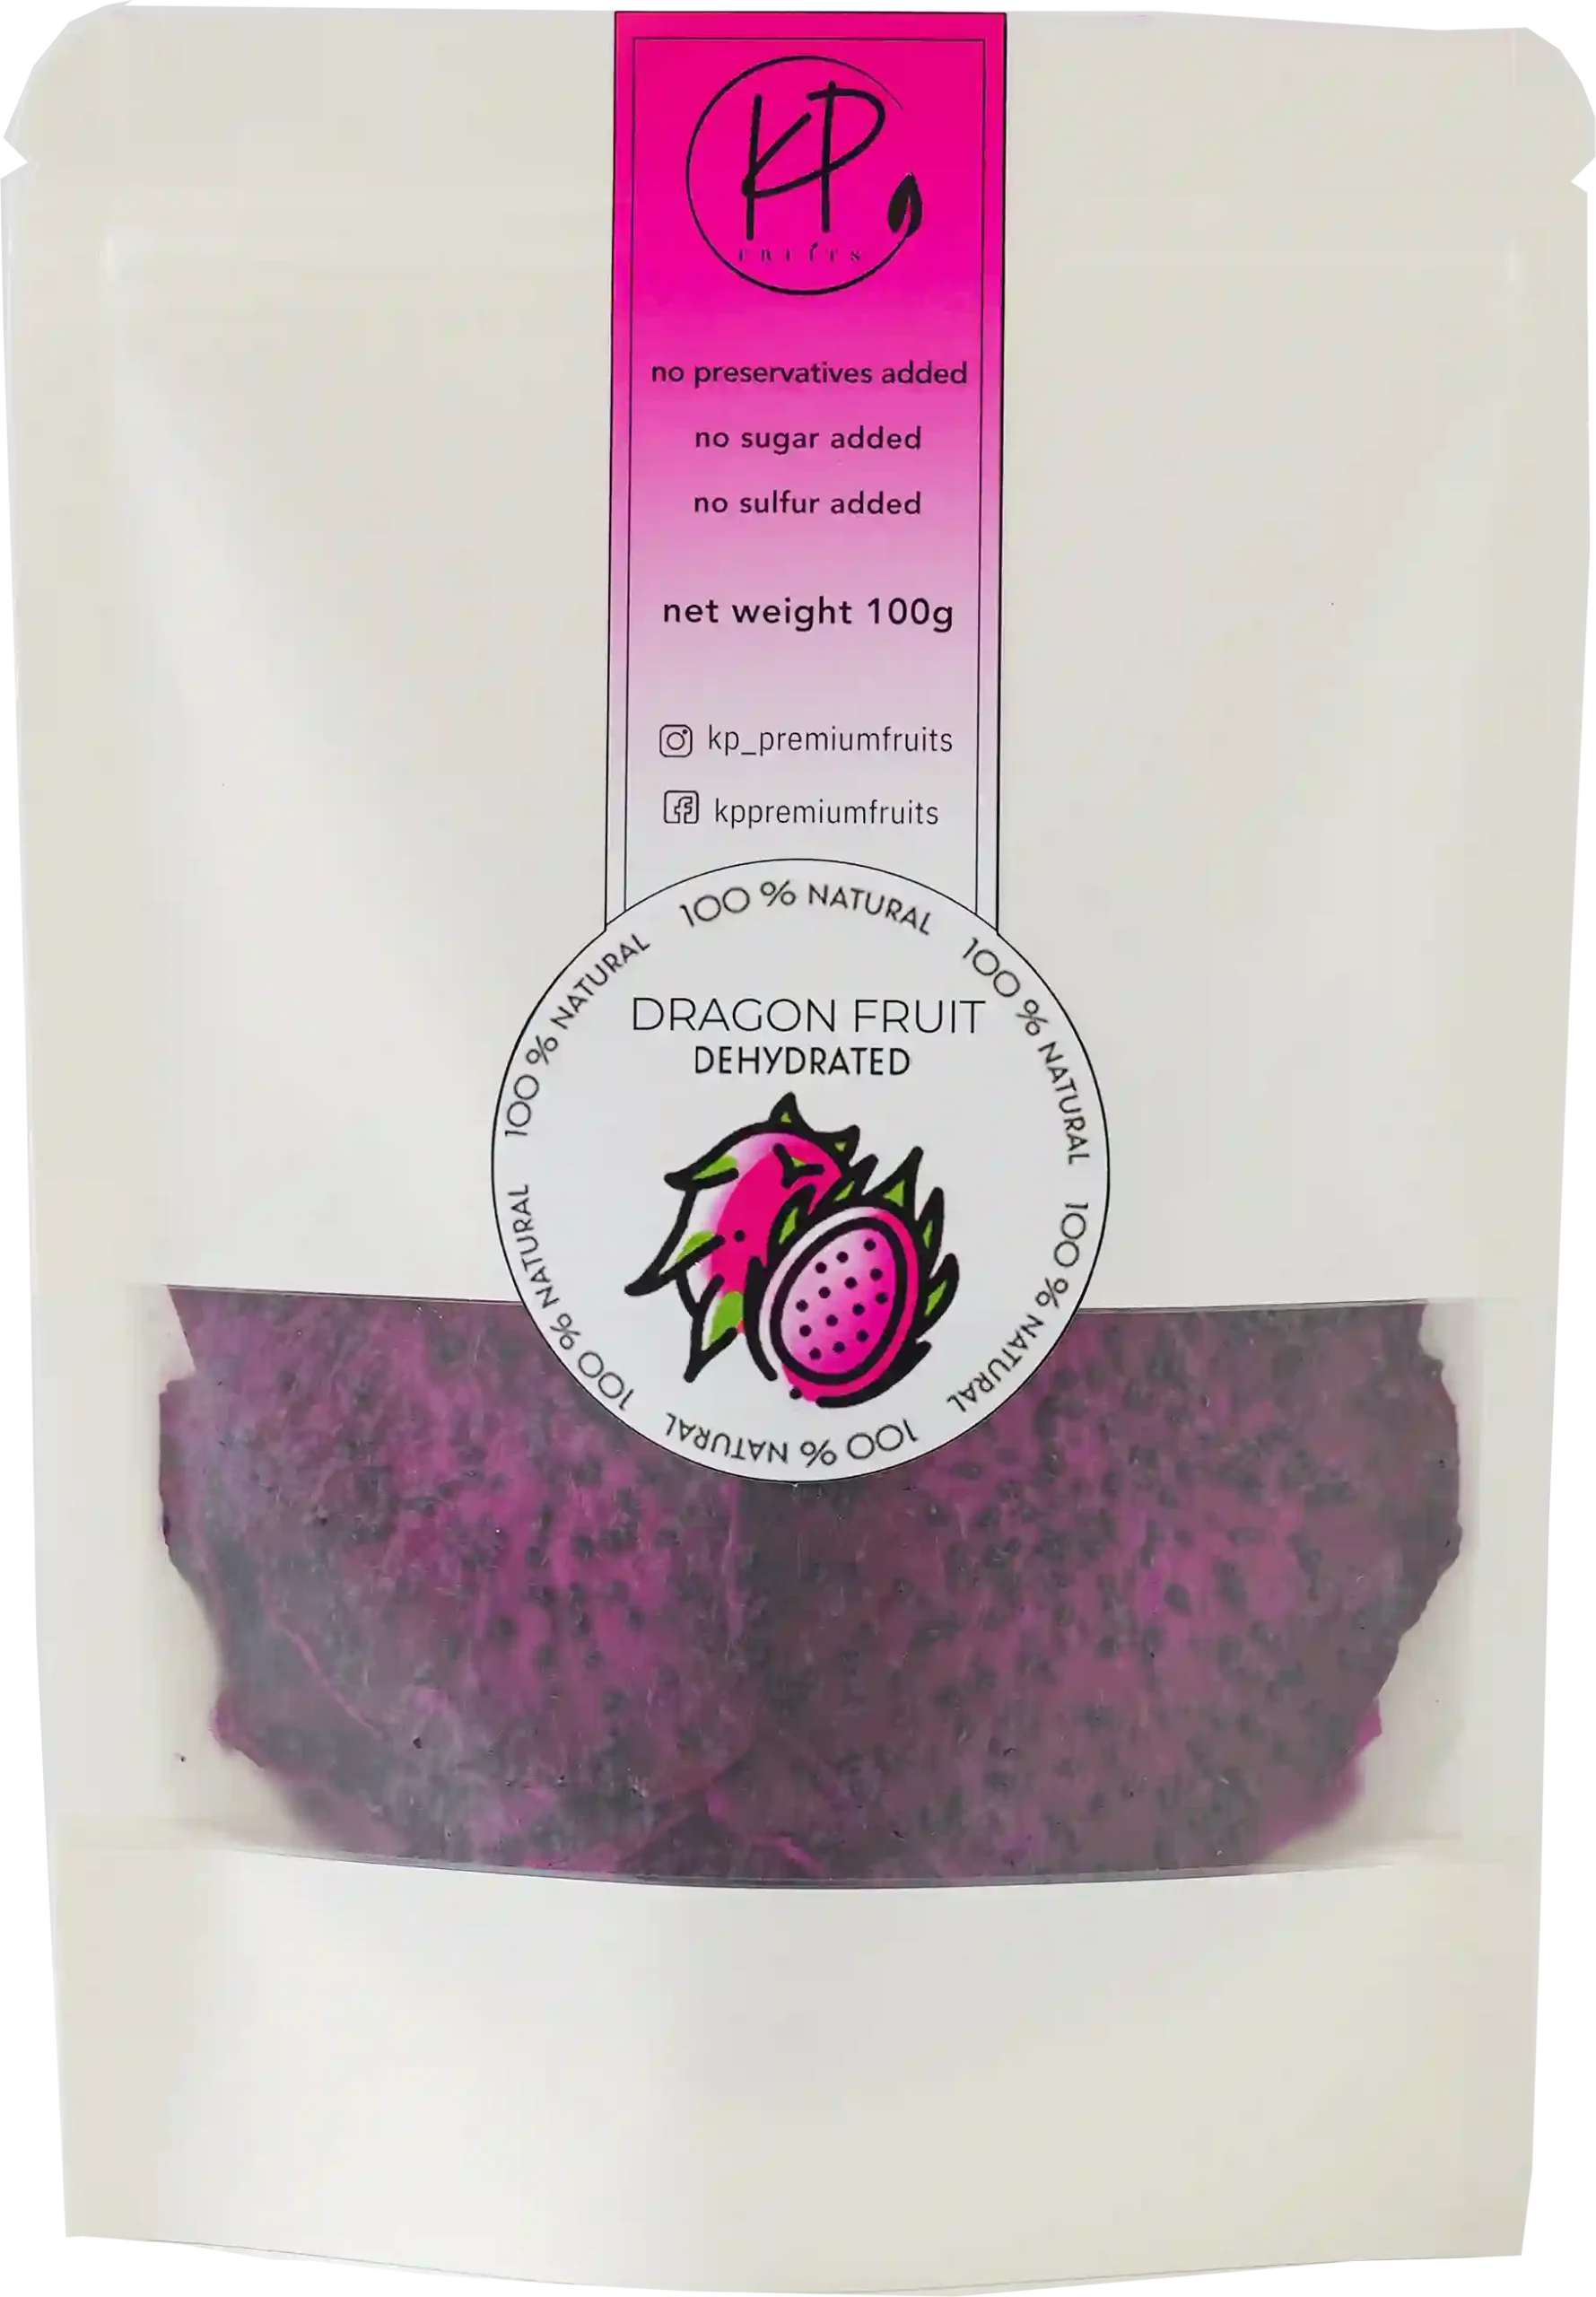 dried dragon fruit is an exotic and flavorful snack, capturing the vibrant colors and distinct taste of dragon fruit in a chewy and preserved form.